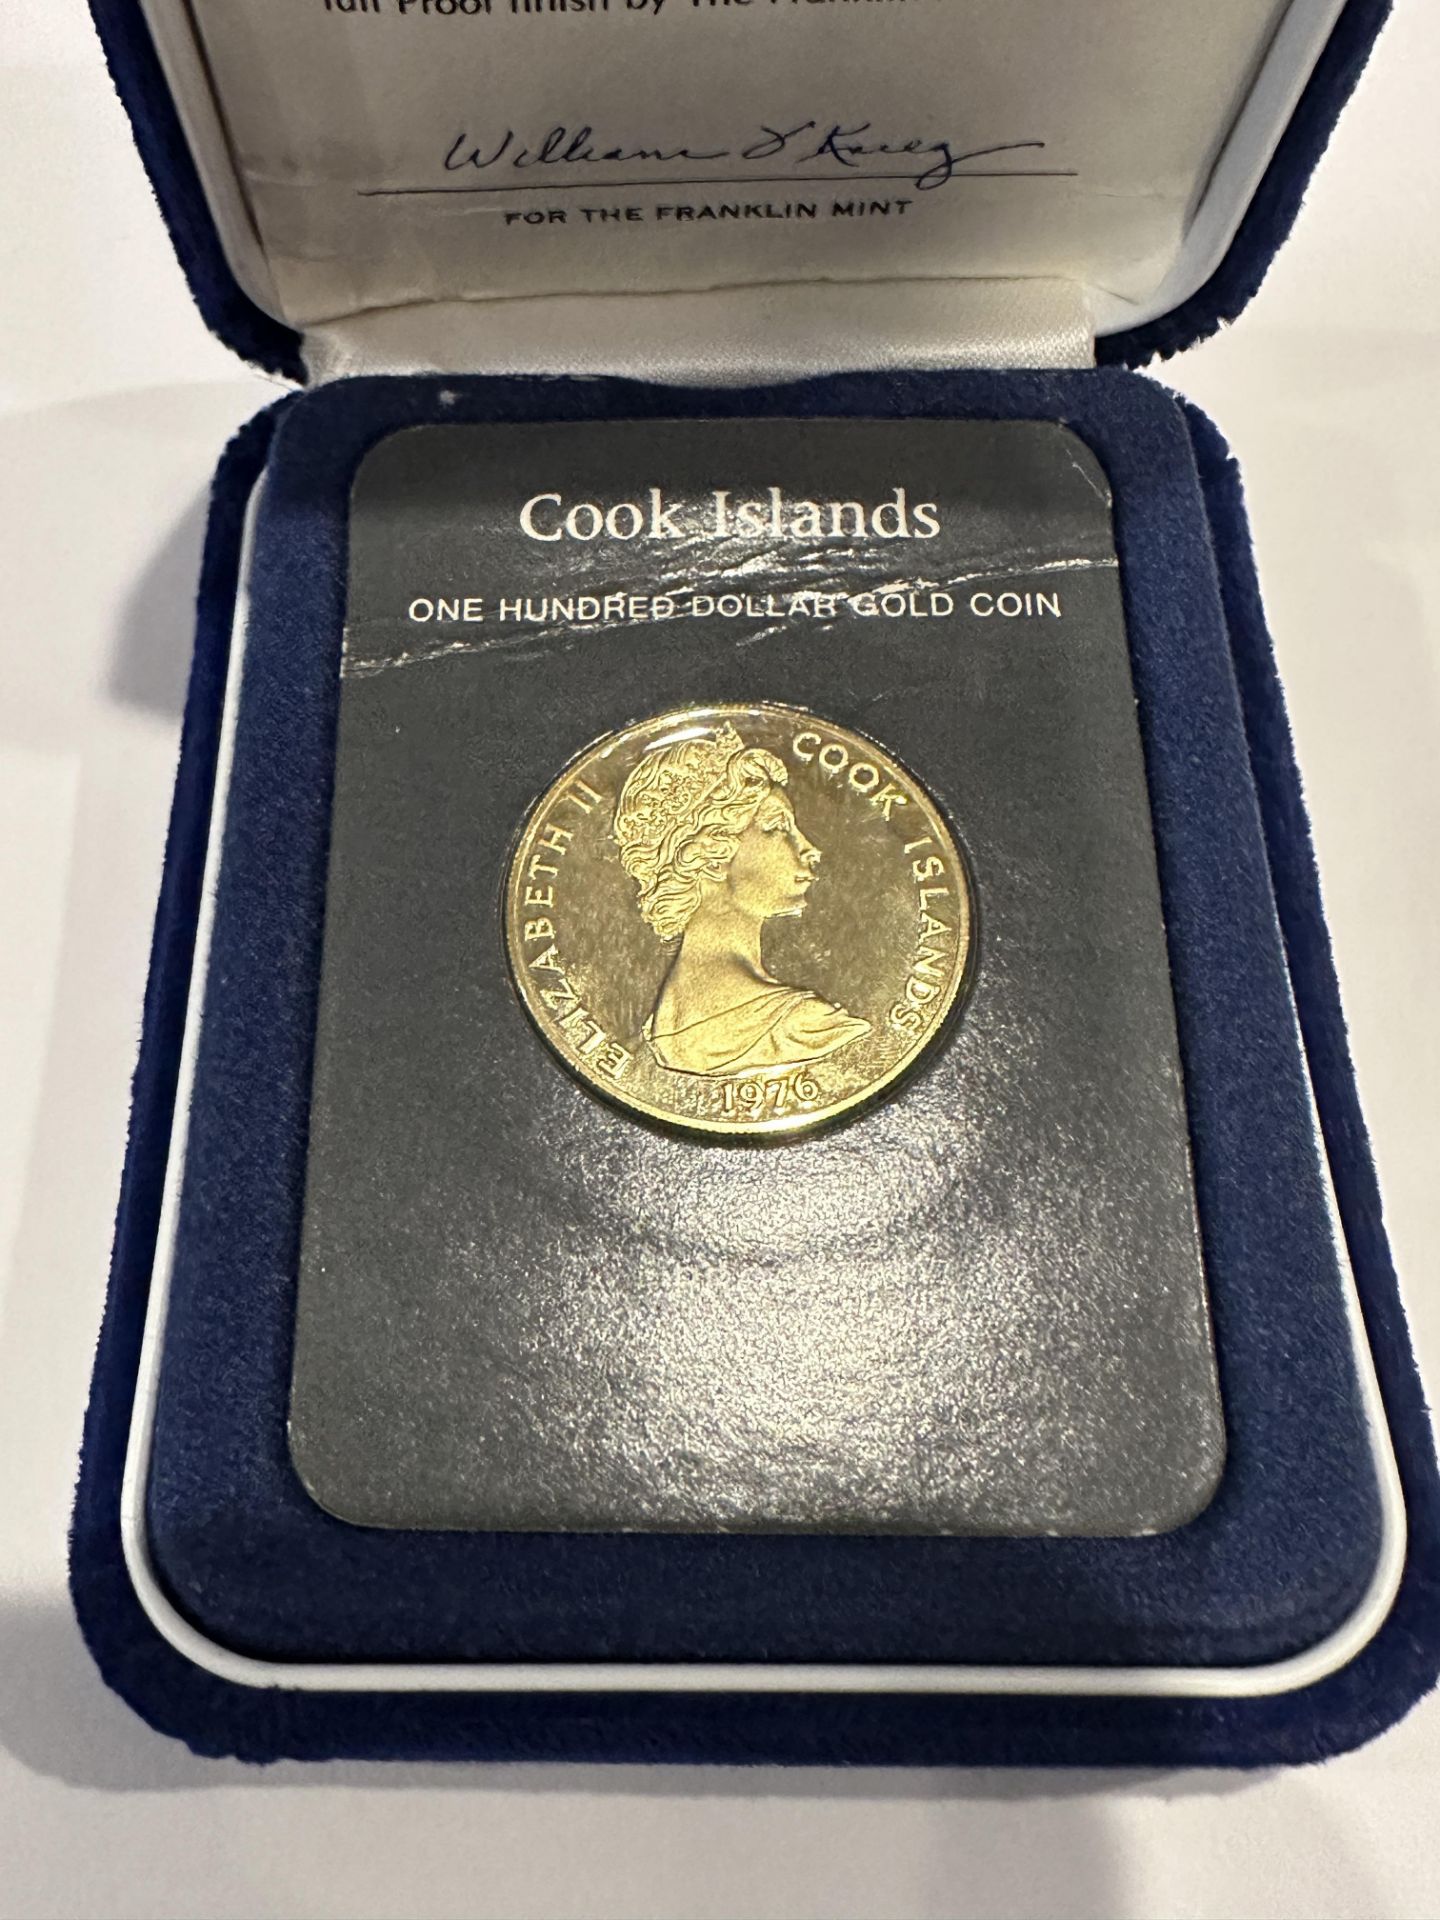 COOK ISLANDS ONE HUNDRED DOLLAR GOLD COIN - Image 2 of 4